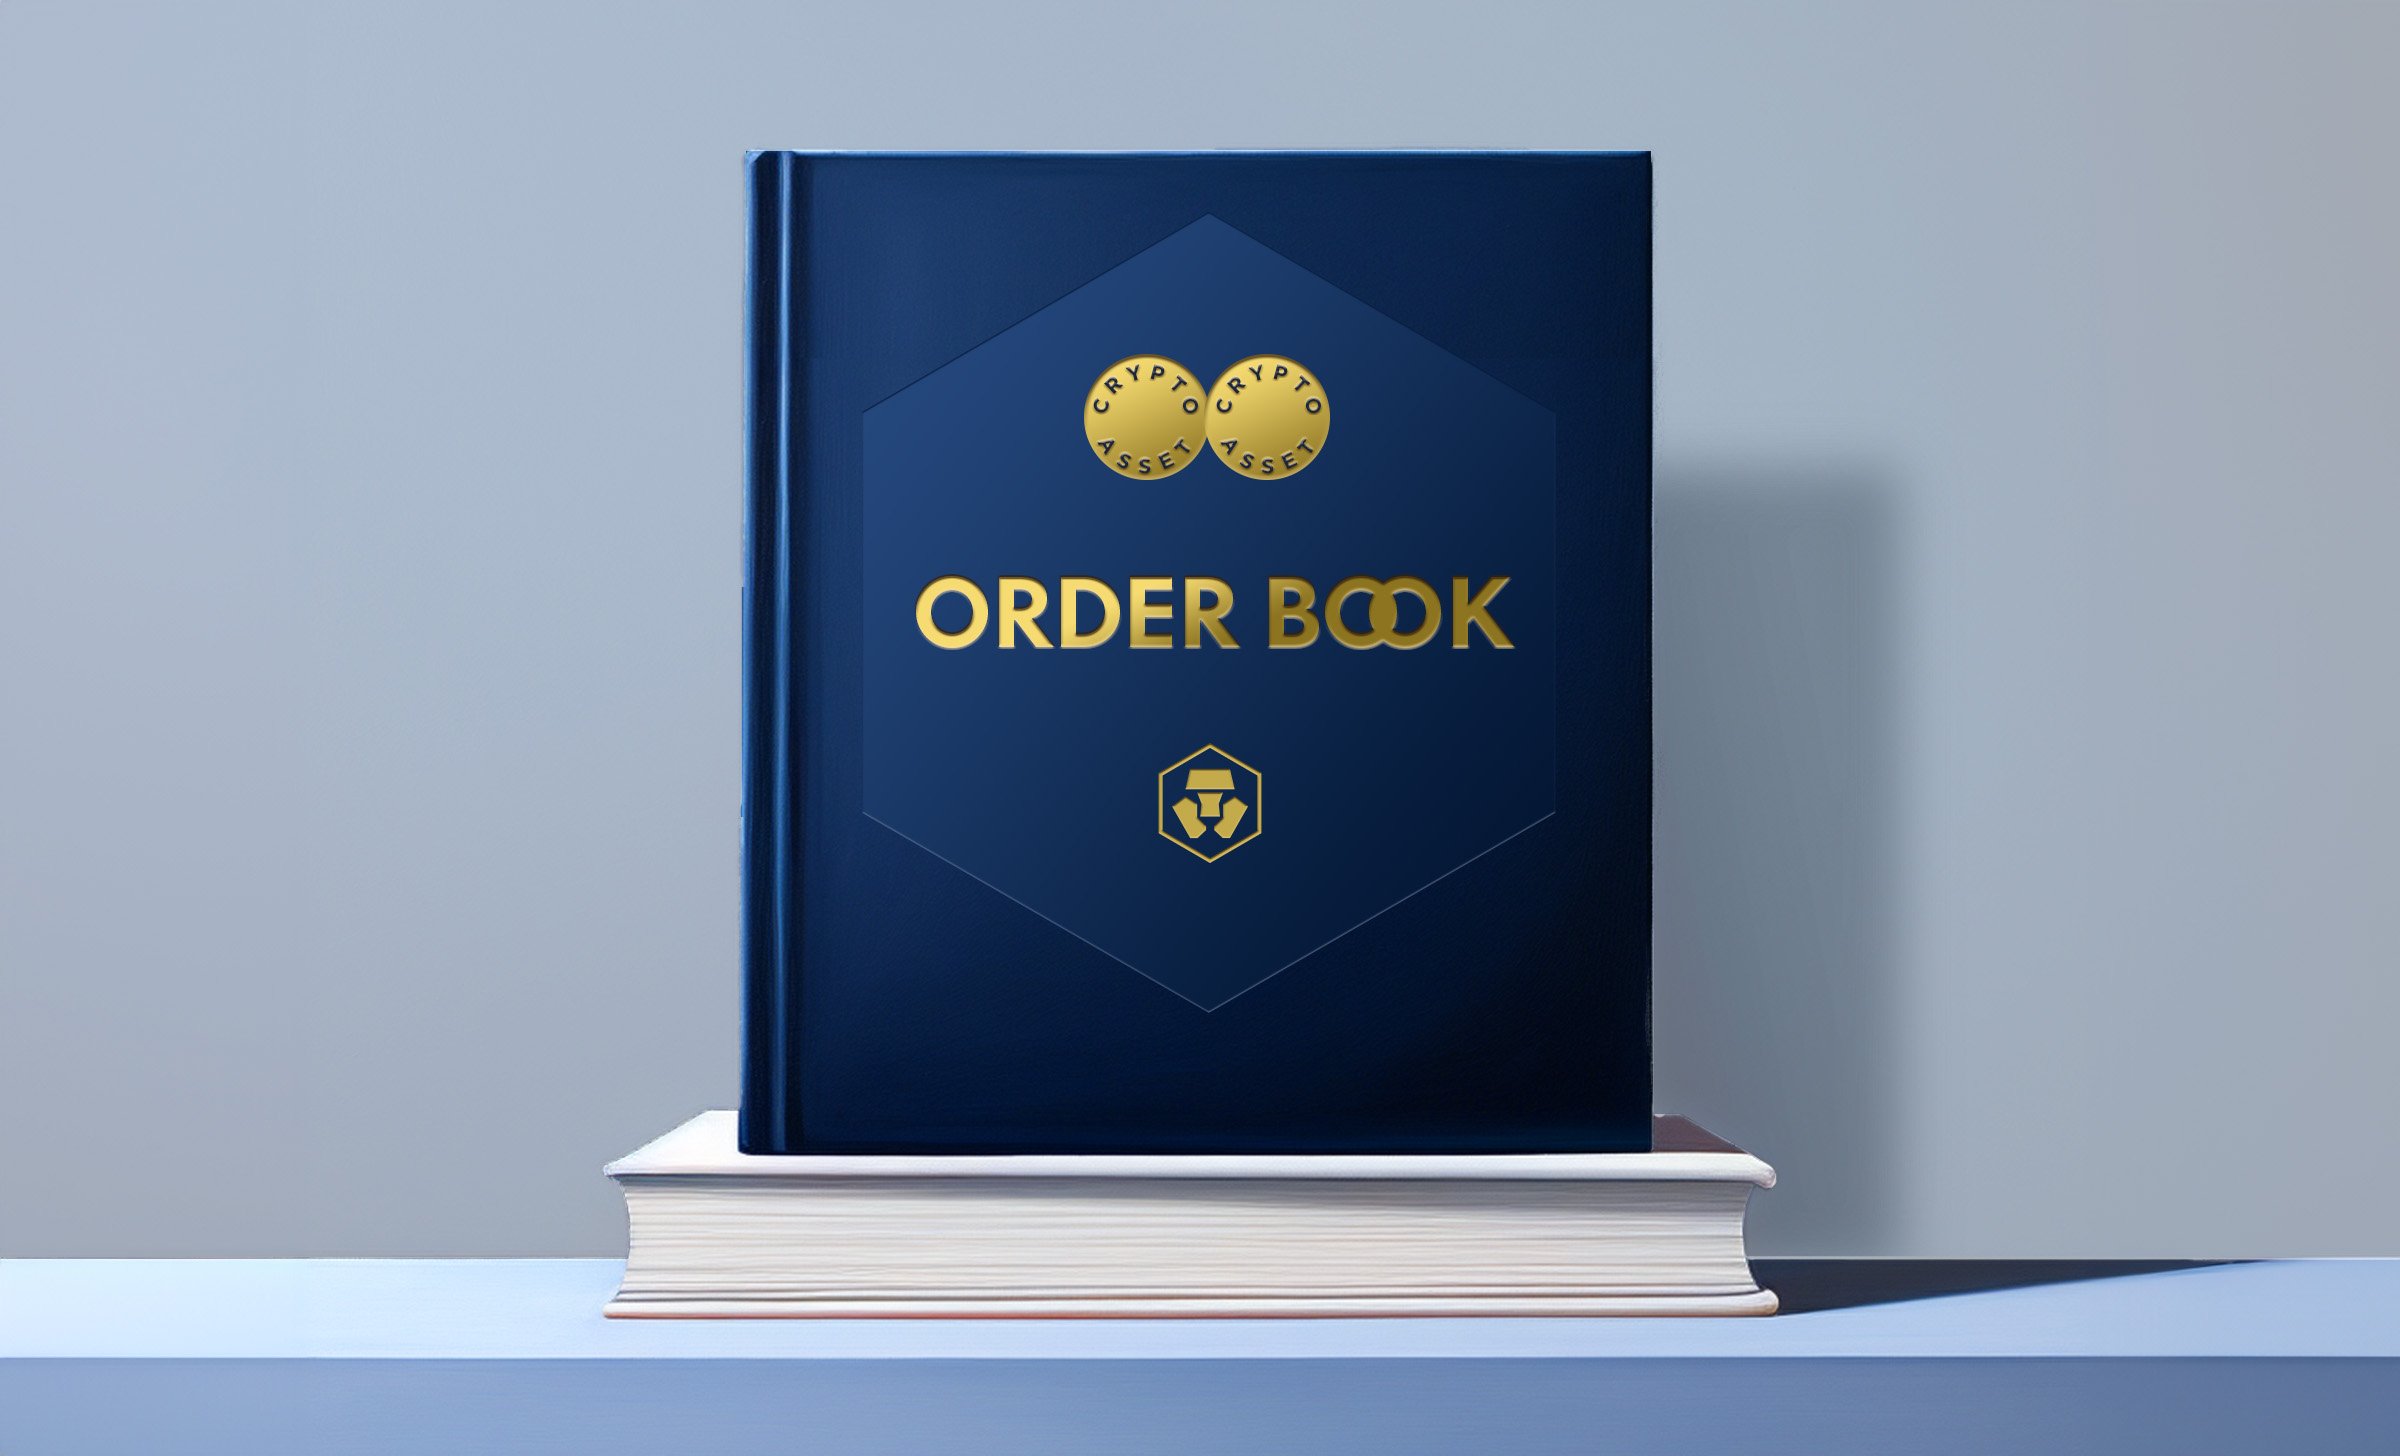 What Is An Order Book